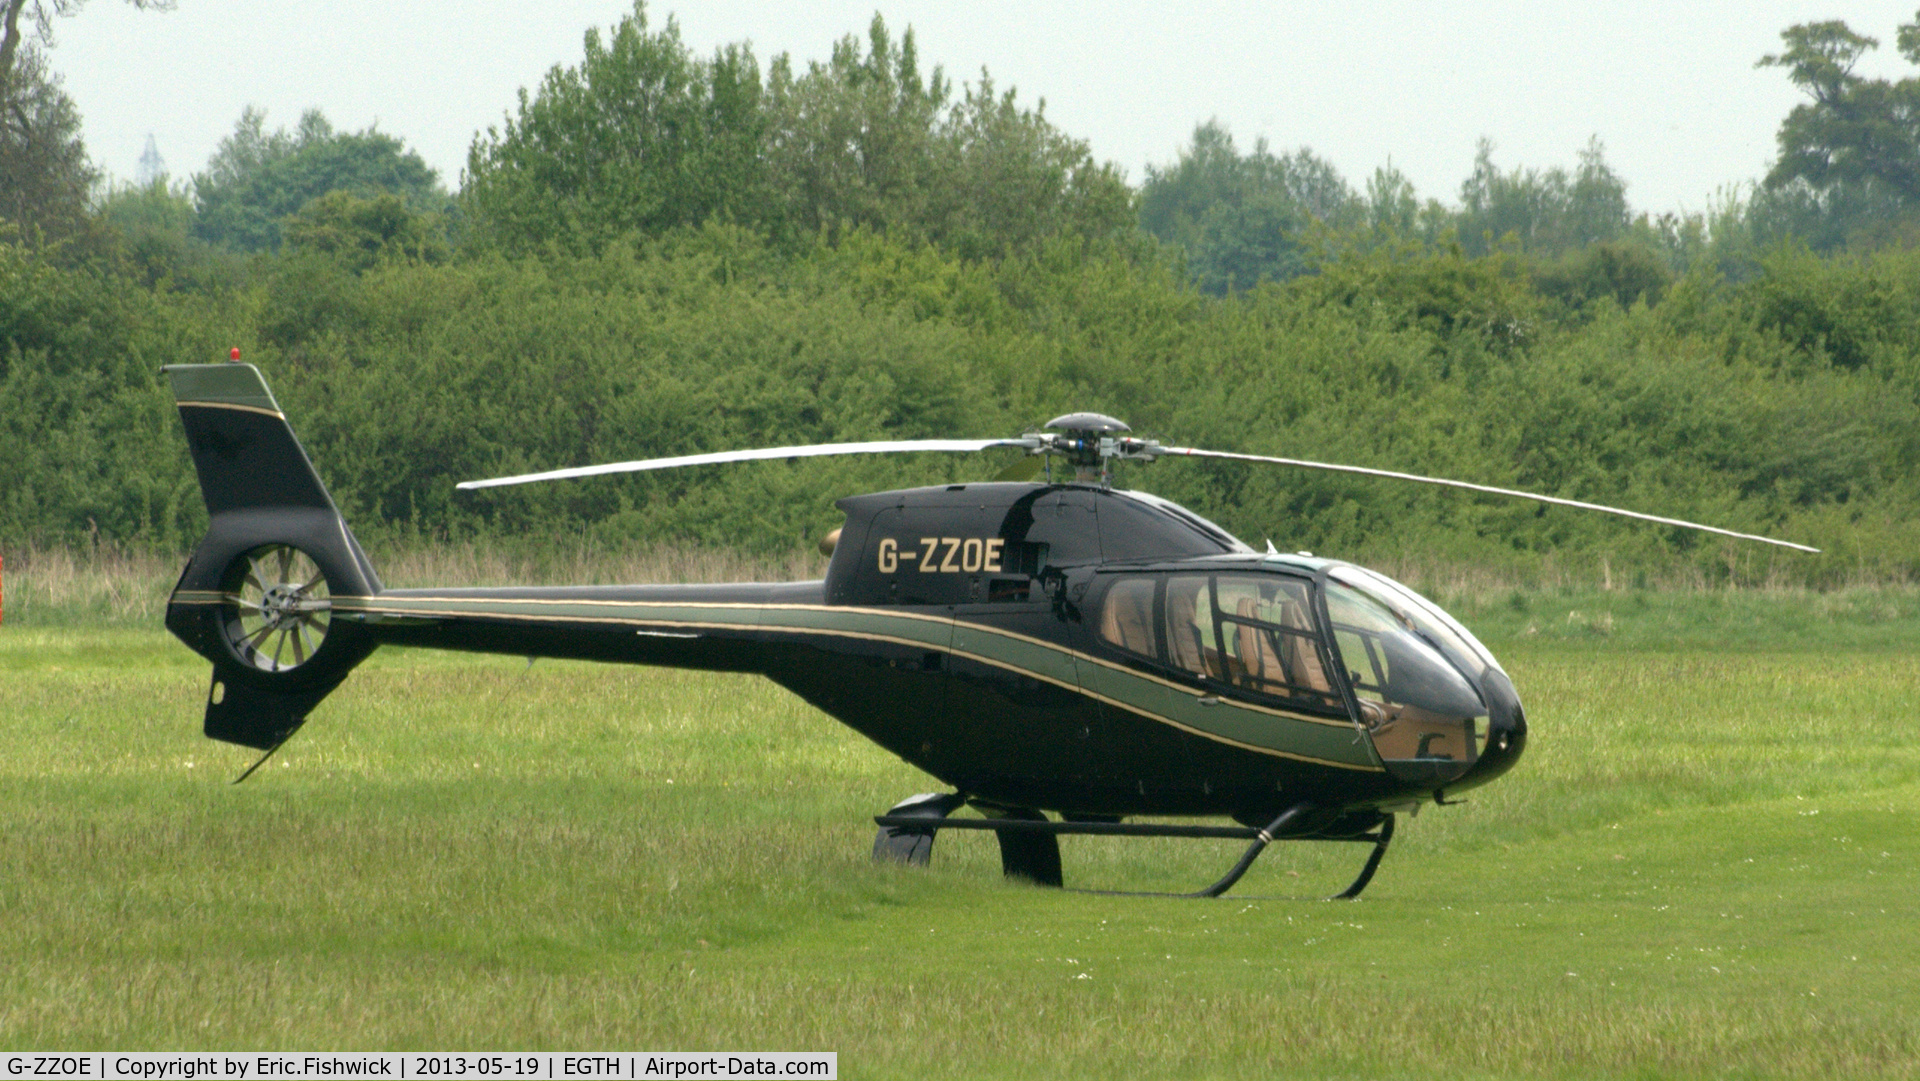 G-ZZOE, 2001 Eurocopter EC-120B Colibri C/N 1196, G-ZZOE at Shuttleworth Flying Day and LAA Party in the Park, May 2013.